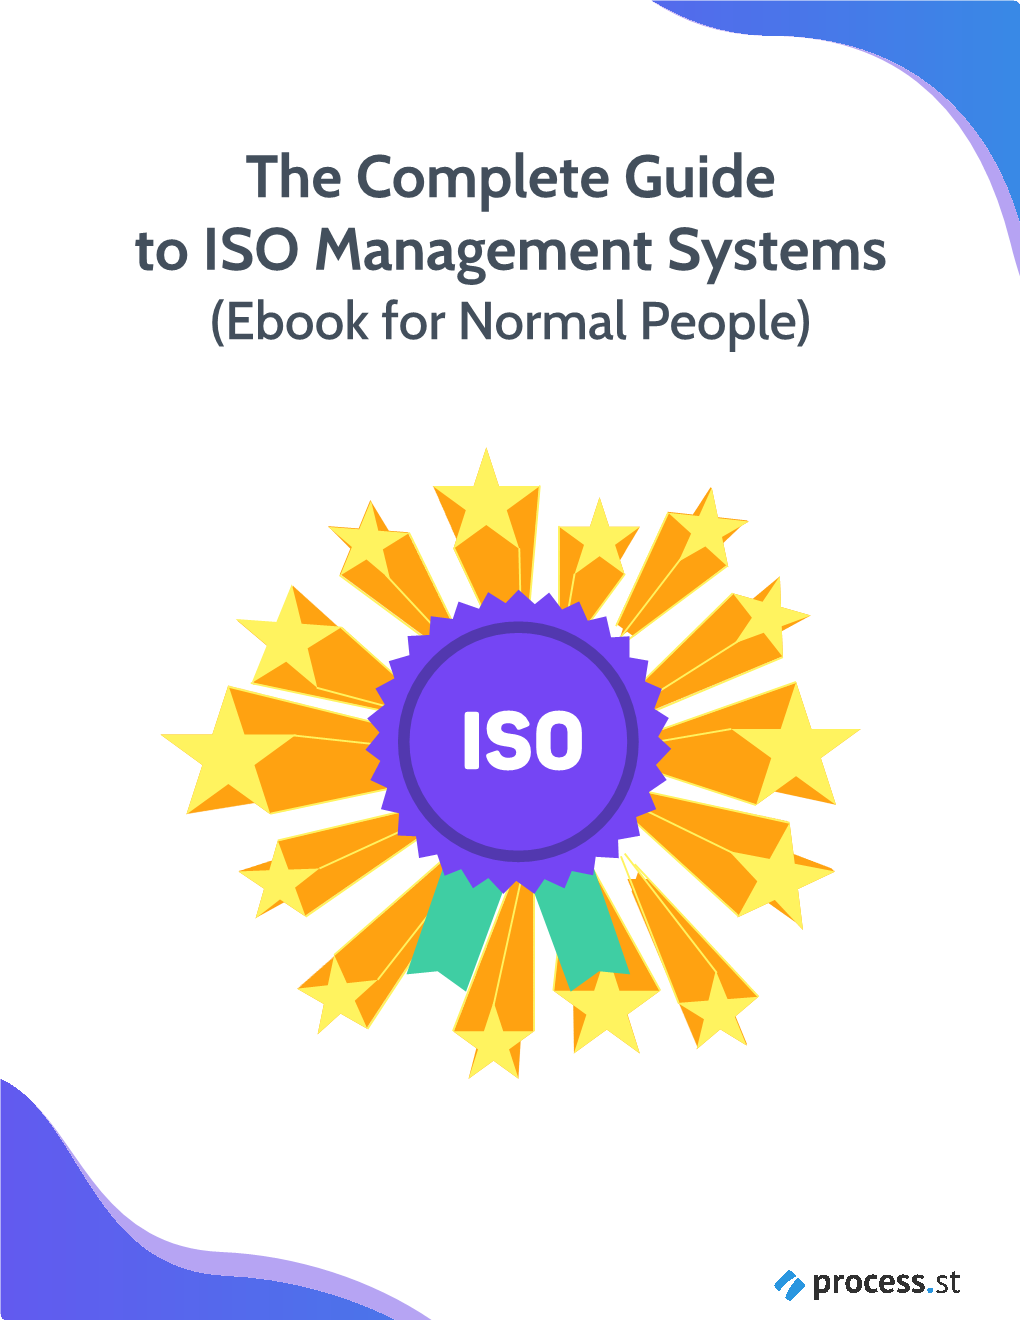 The Complete Guide to ISO Management Systems (Ebook for Normal People)